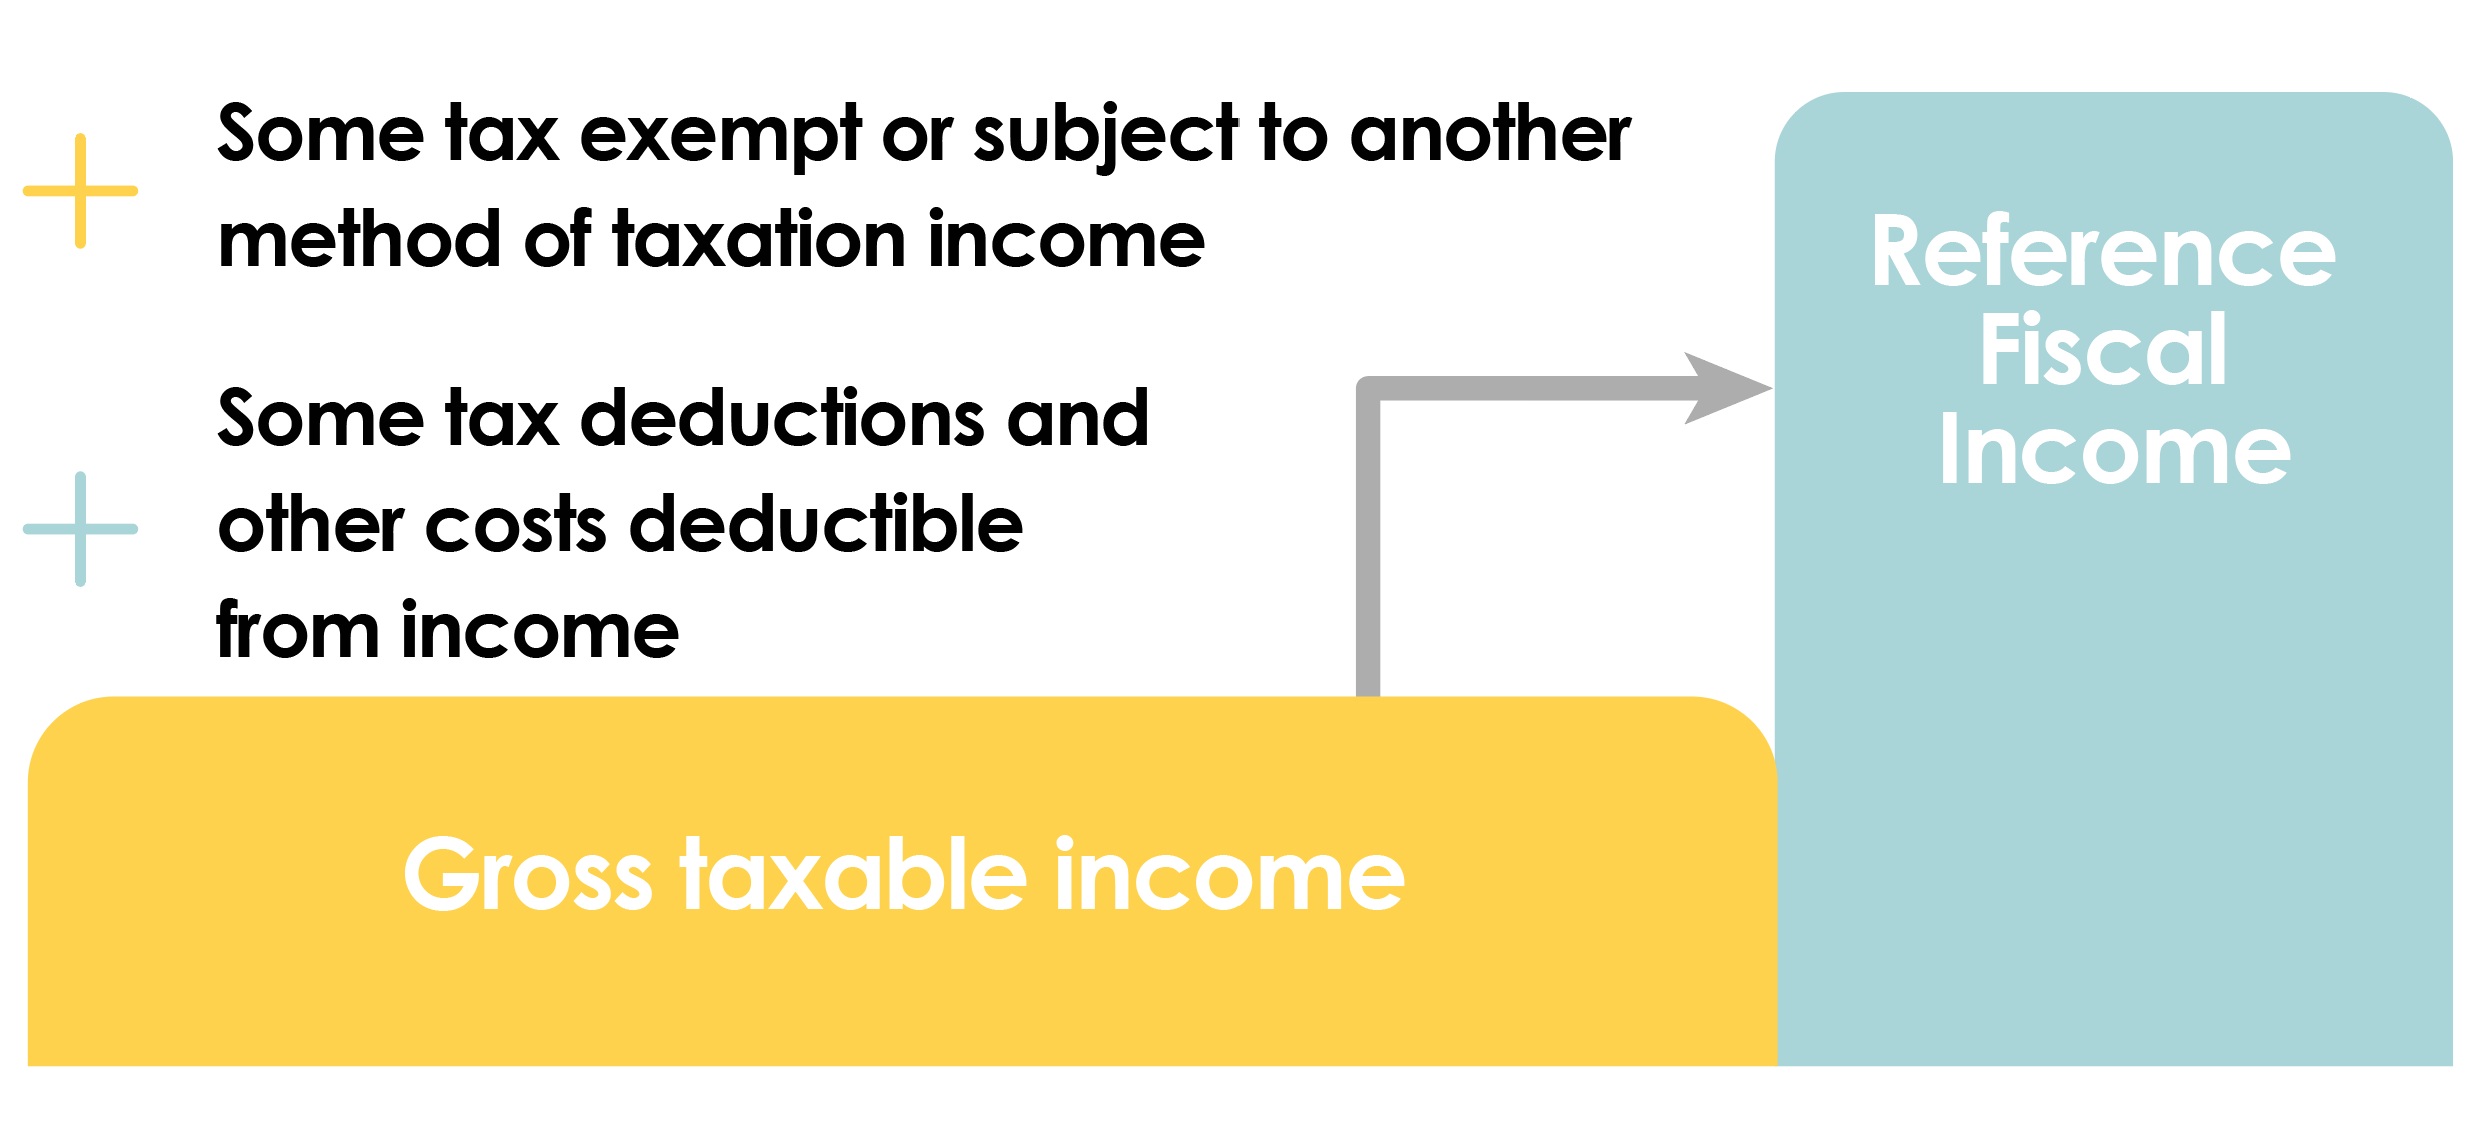 Diagram showing the calculation to go from gross taxable income to reference tax income (RFR) 